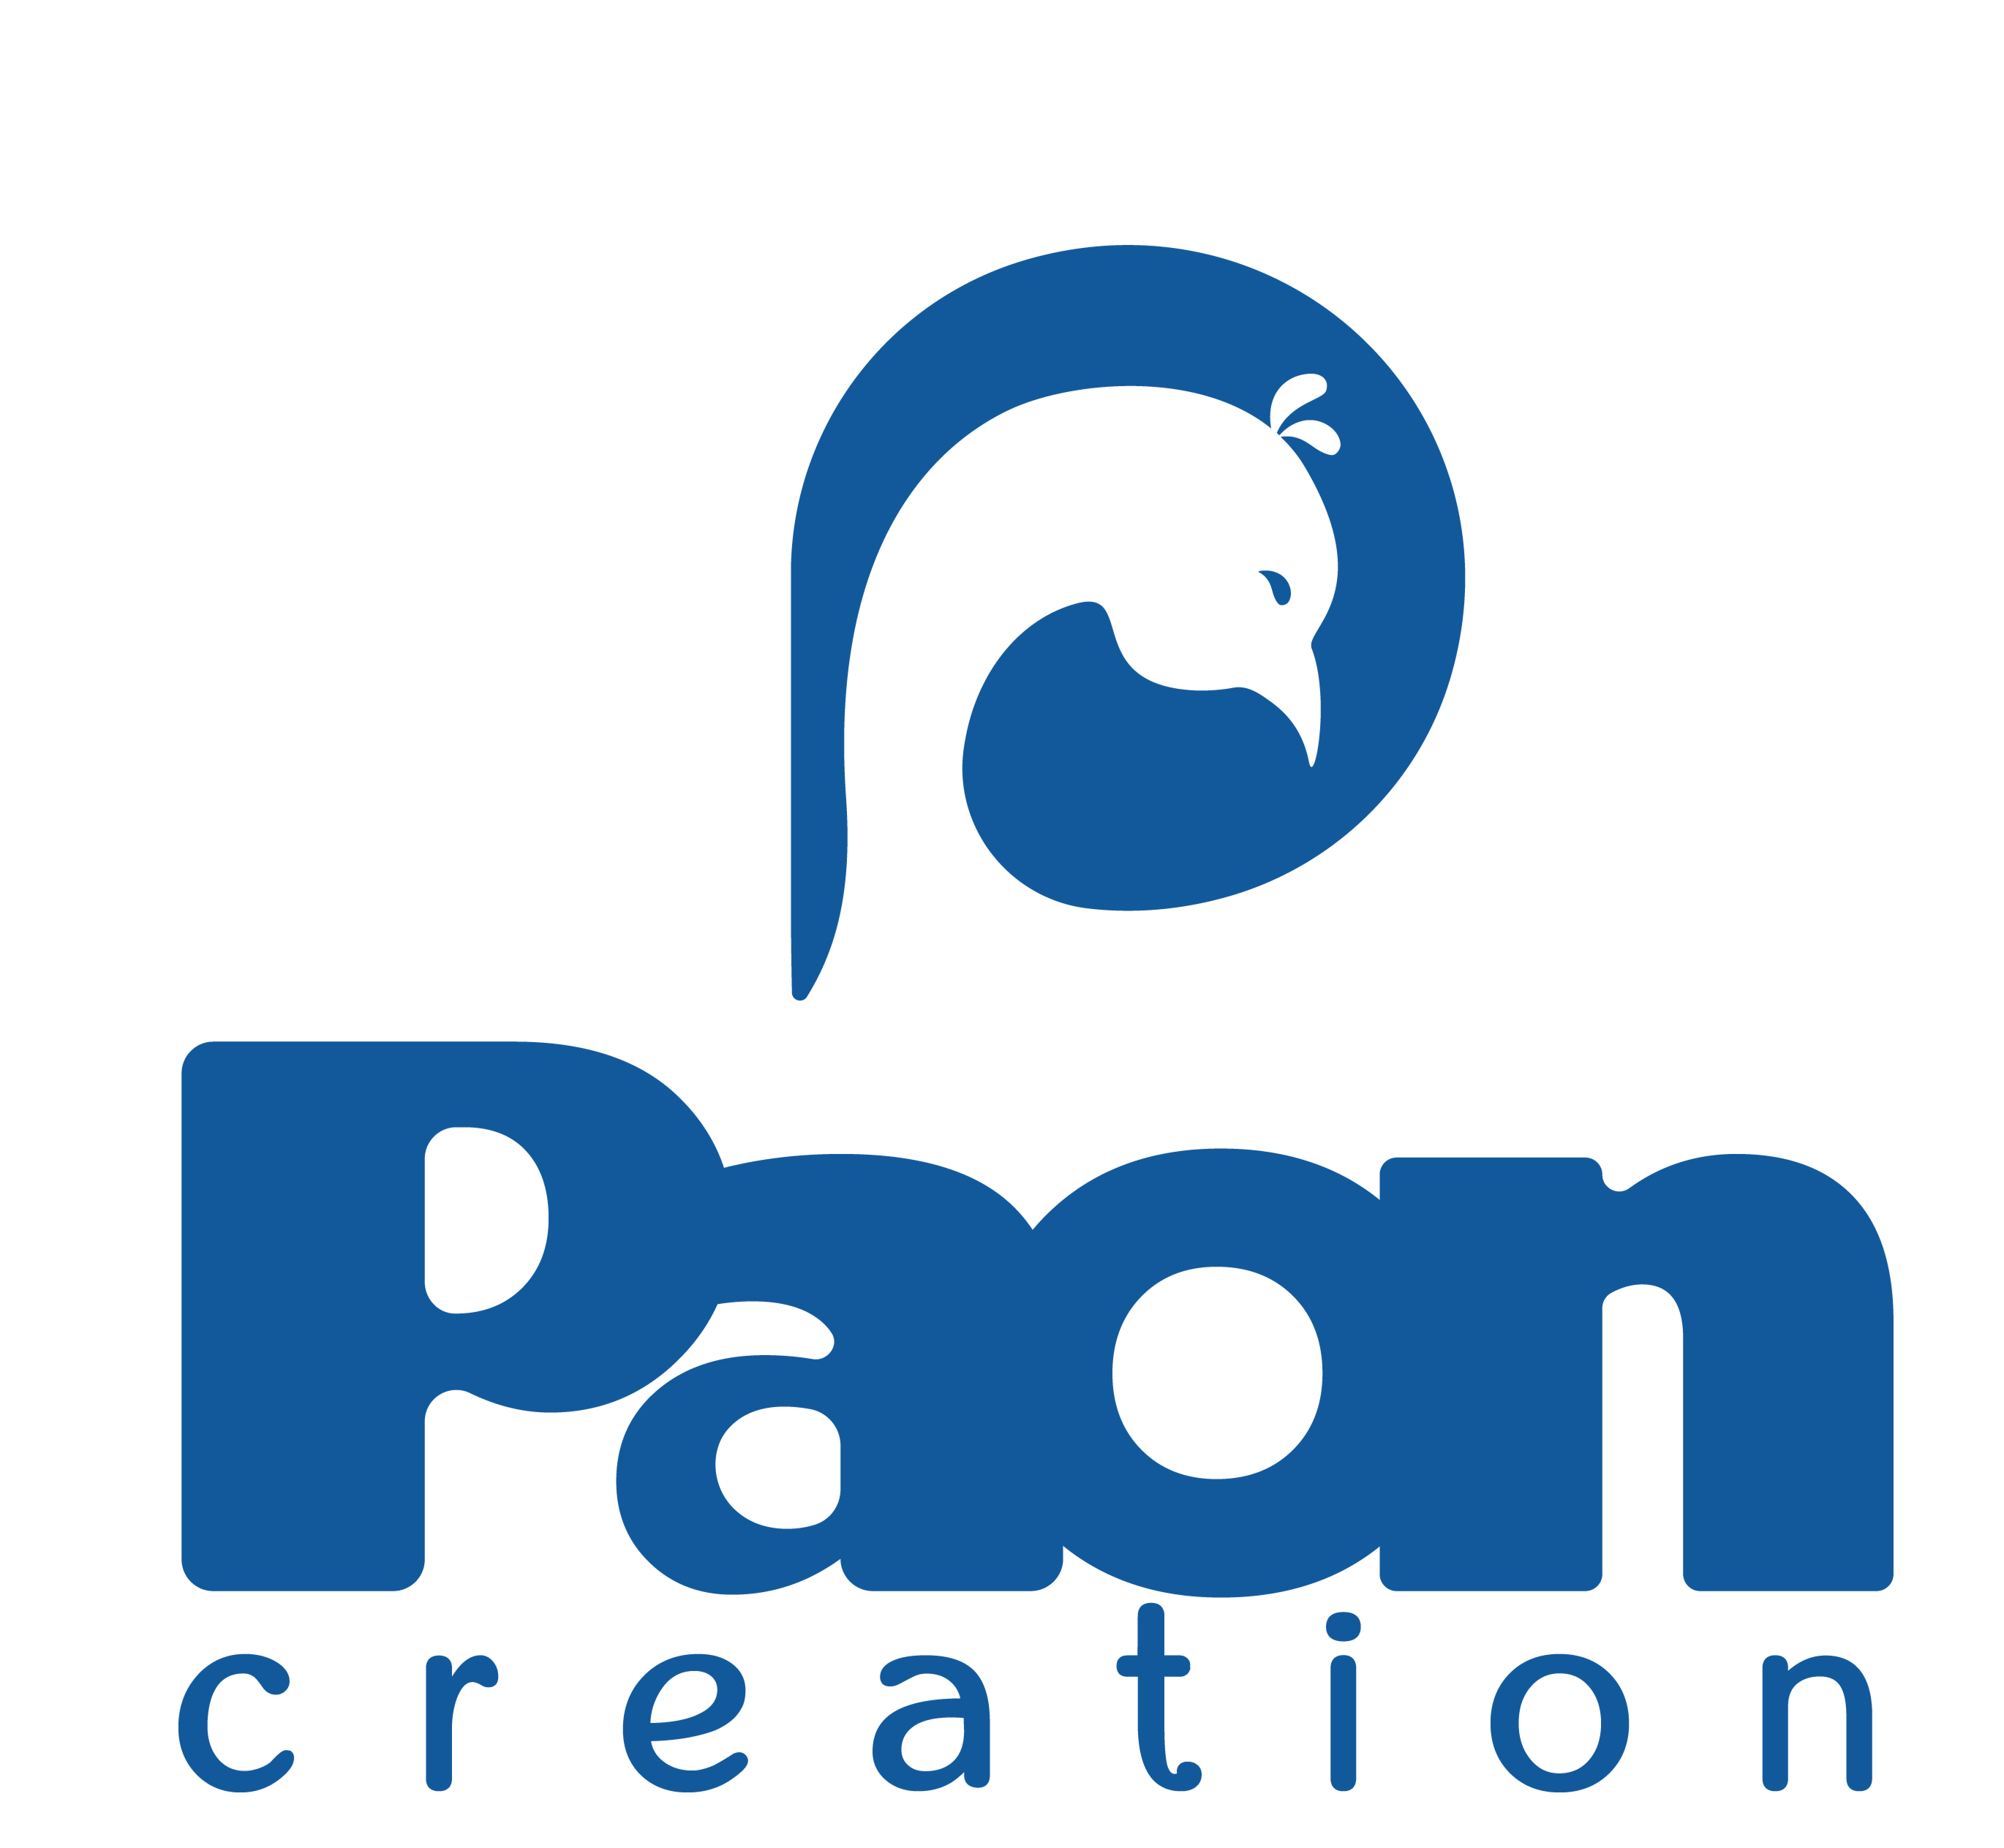 Paoncreation